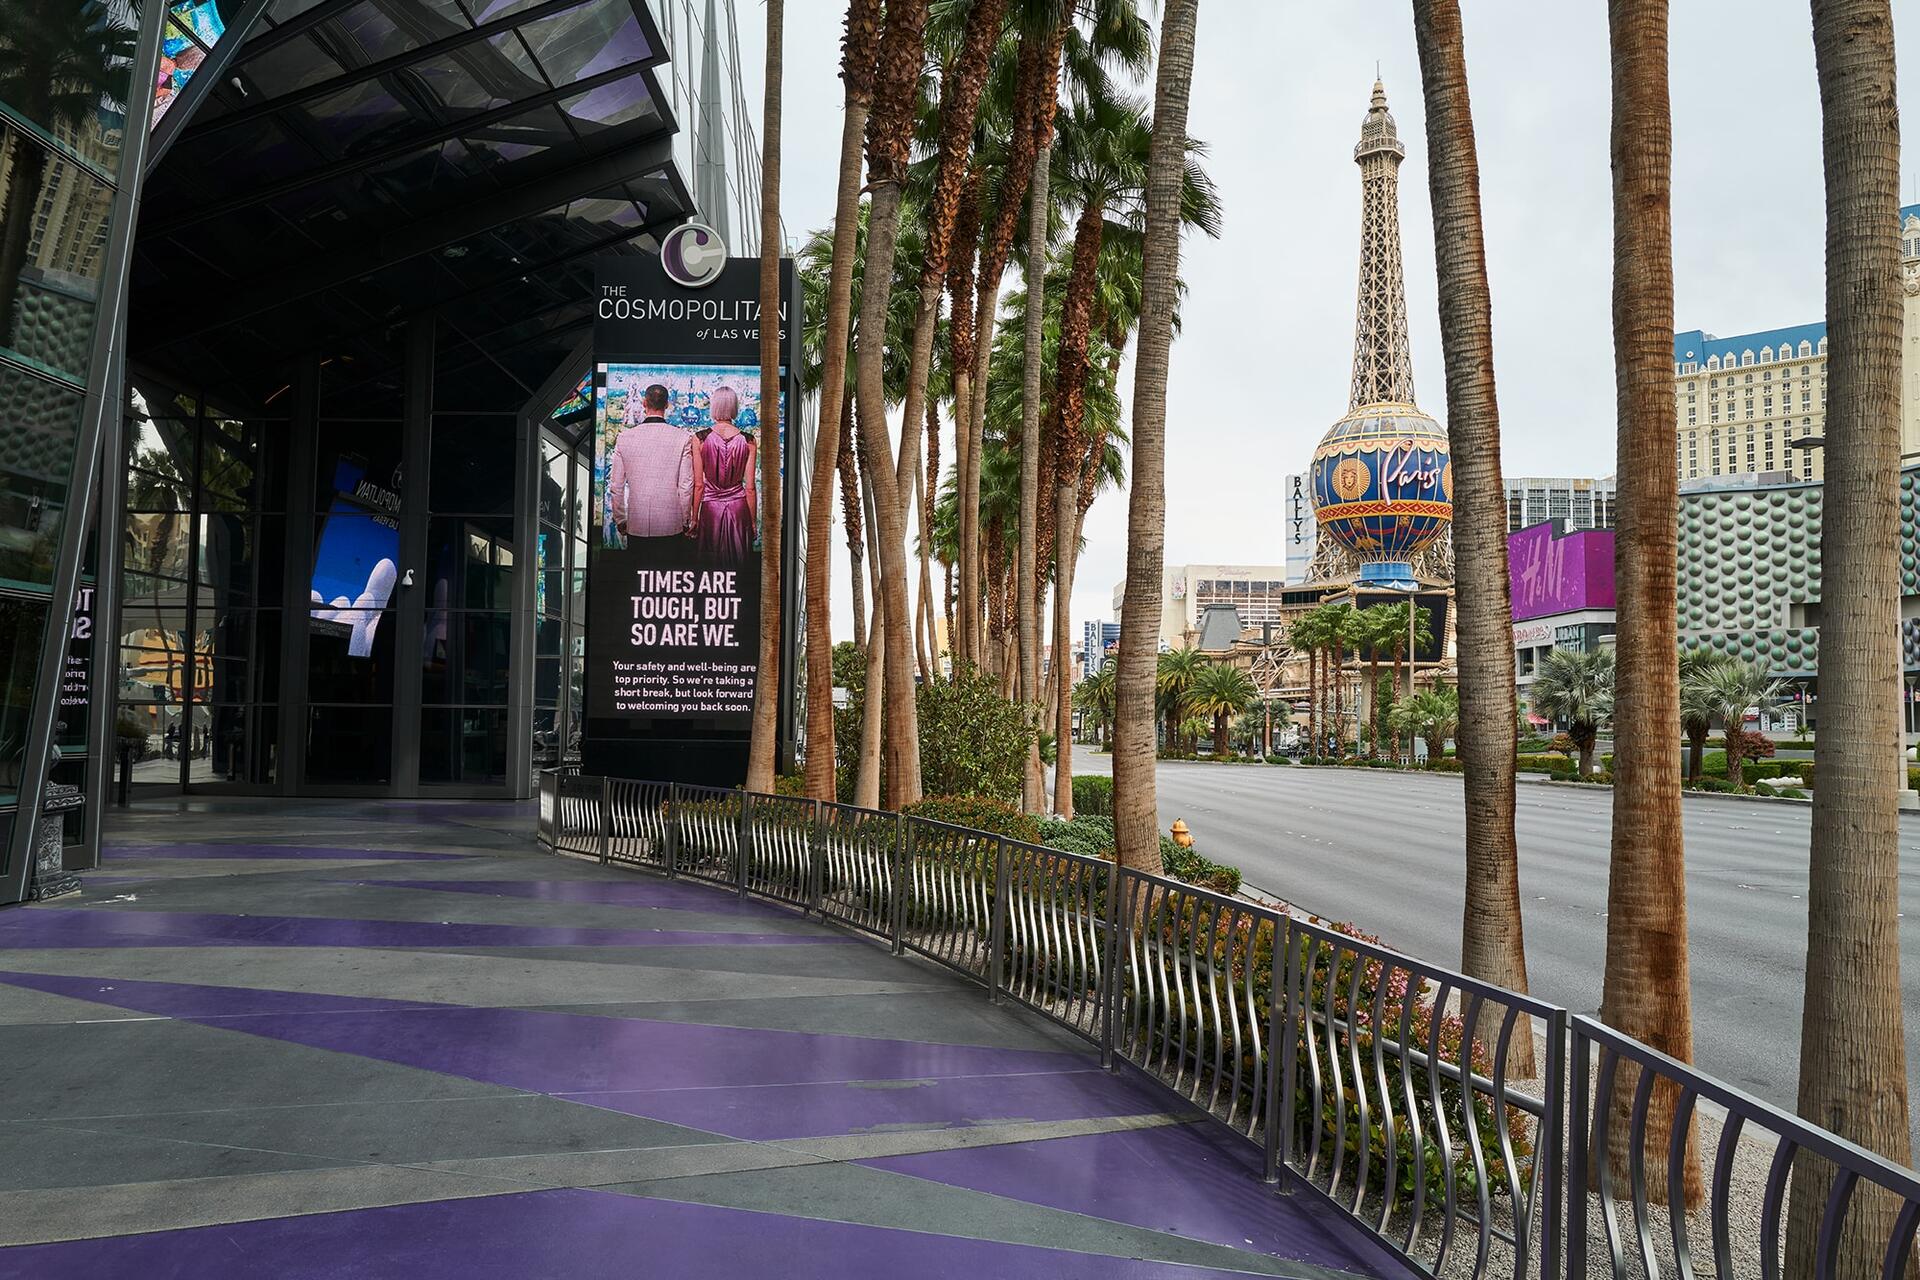 After the end of the world: the eerie silence of the Las Vegas Strip, Coronavirus